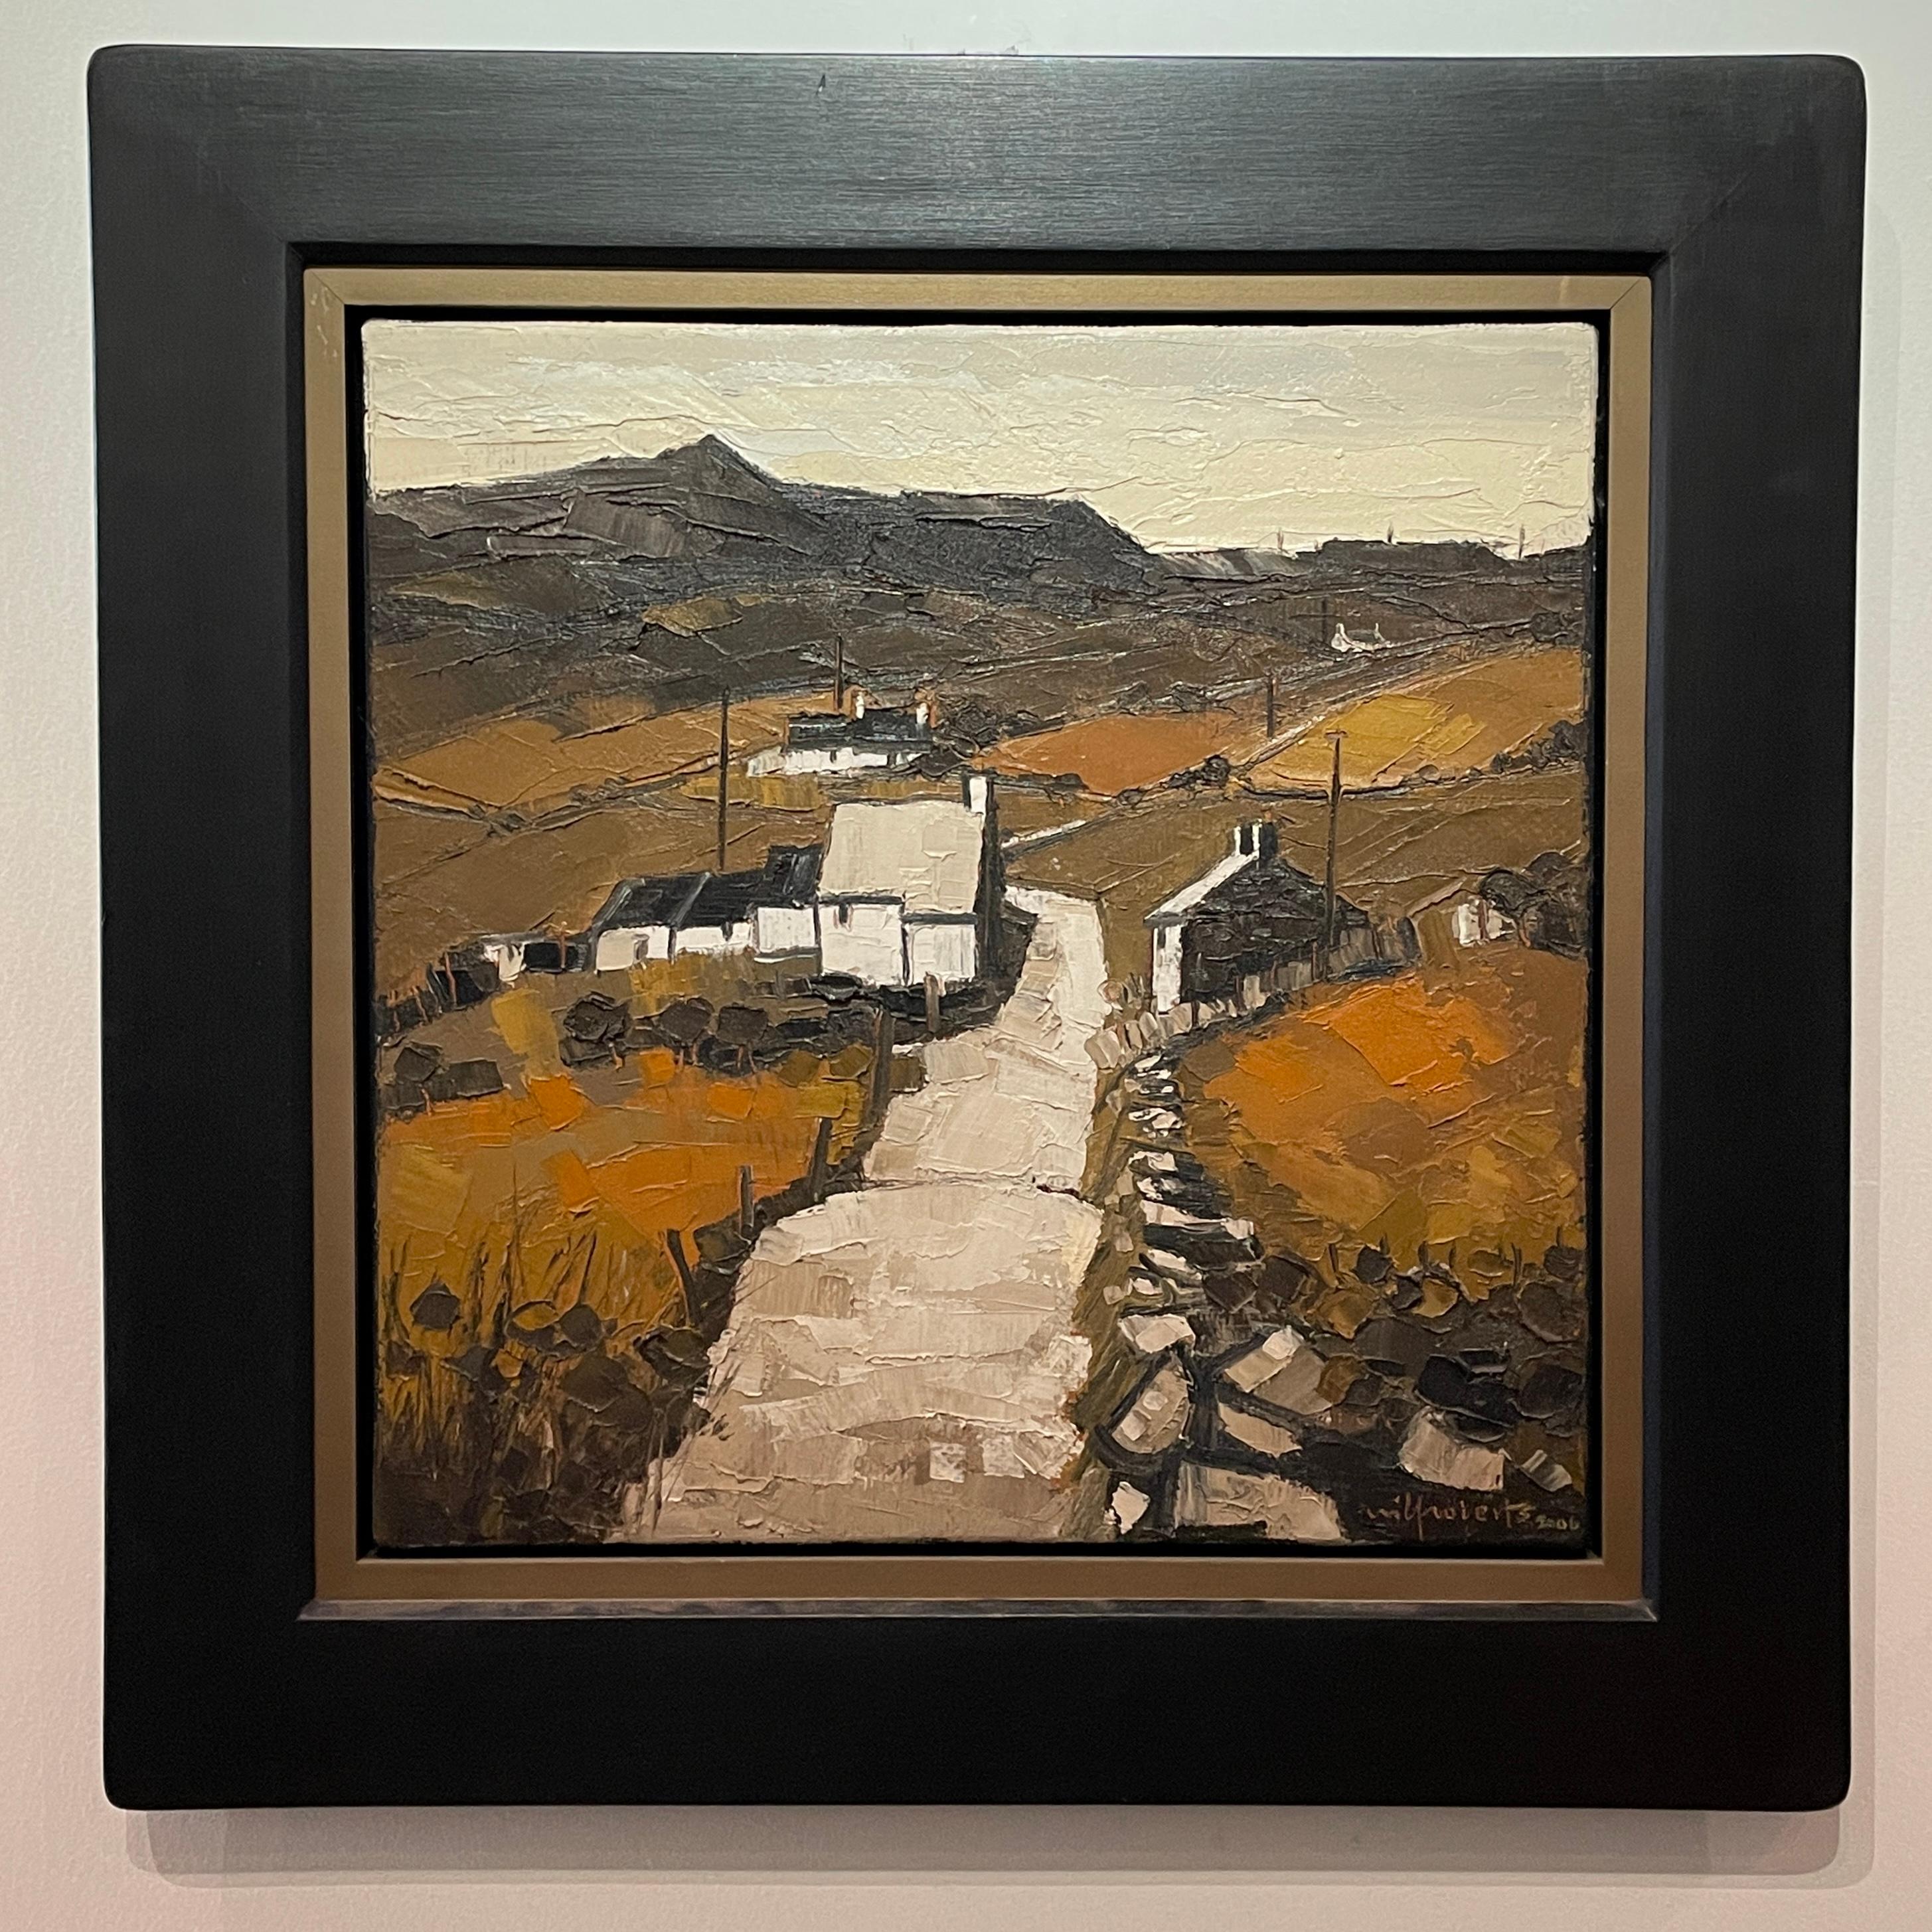 With a rich impasto and organic colour palette you can see Wilf Roberts takes great inspiration from Sir Kyffin Williams – a fellow Welsh landscape painter.
'Y Garn' Welsh landscape painting of a hillside with cottages and mountains. Orange colour